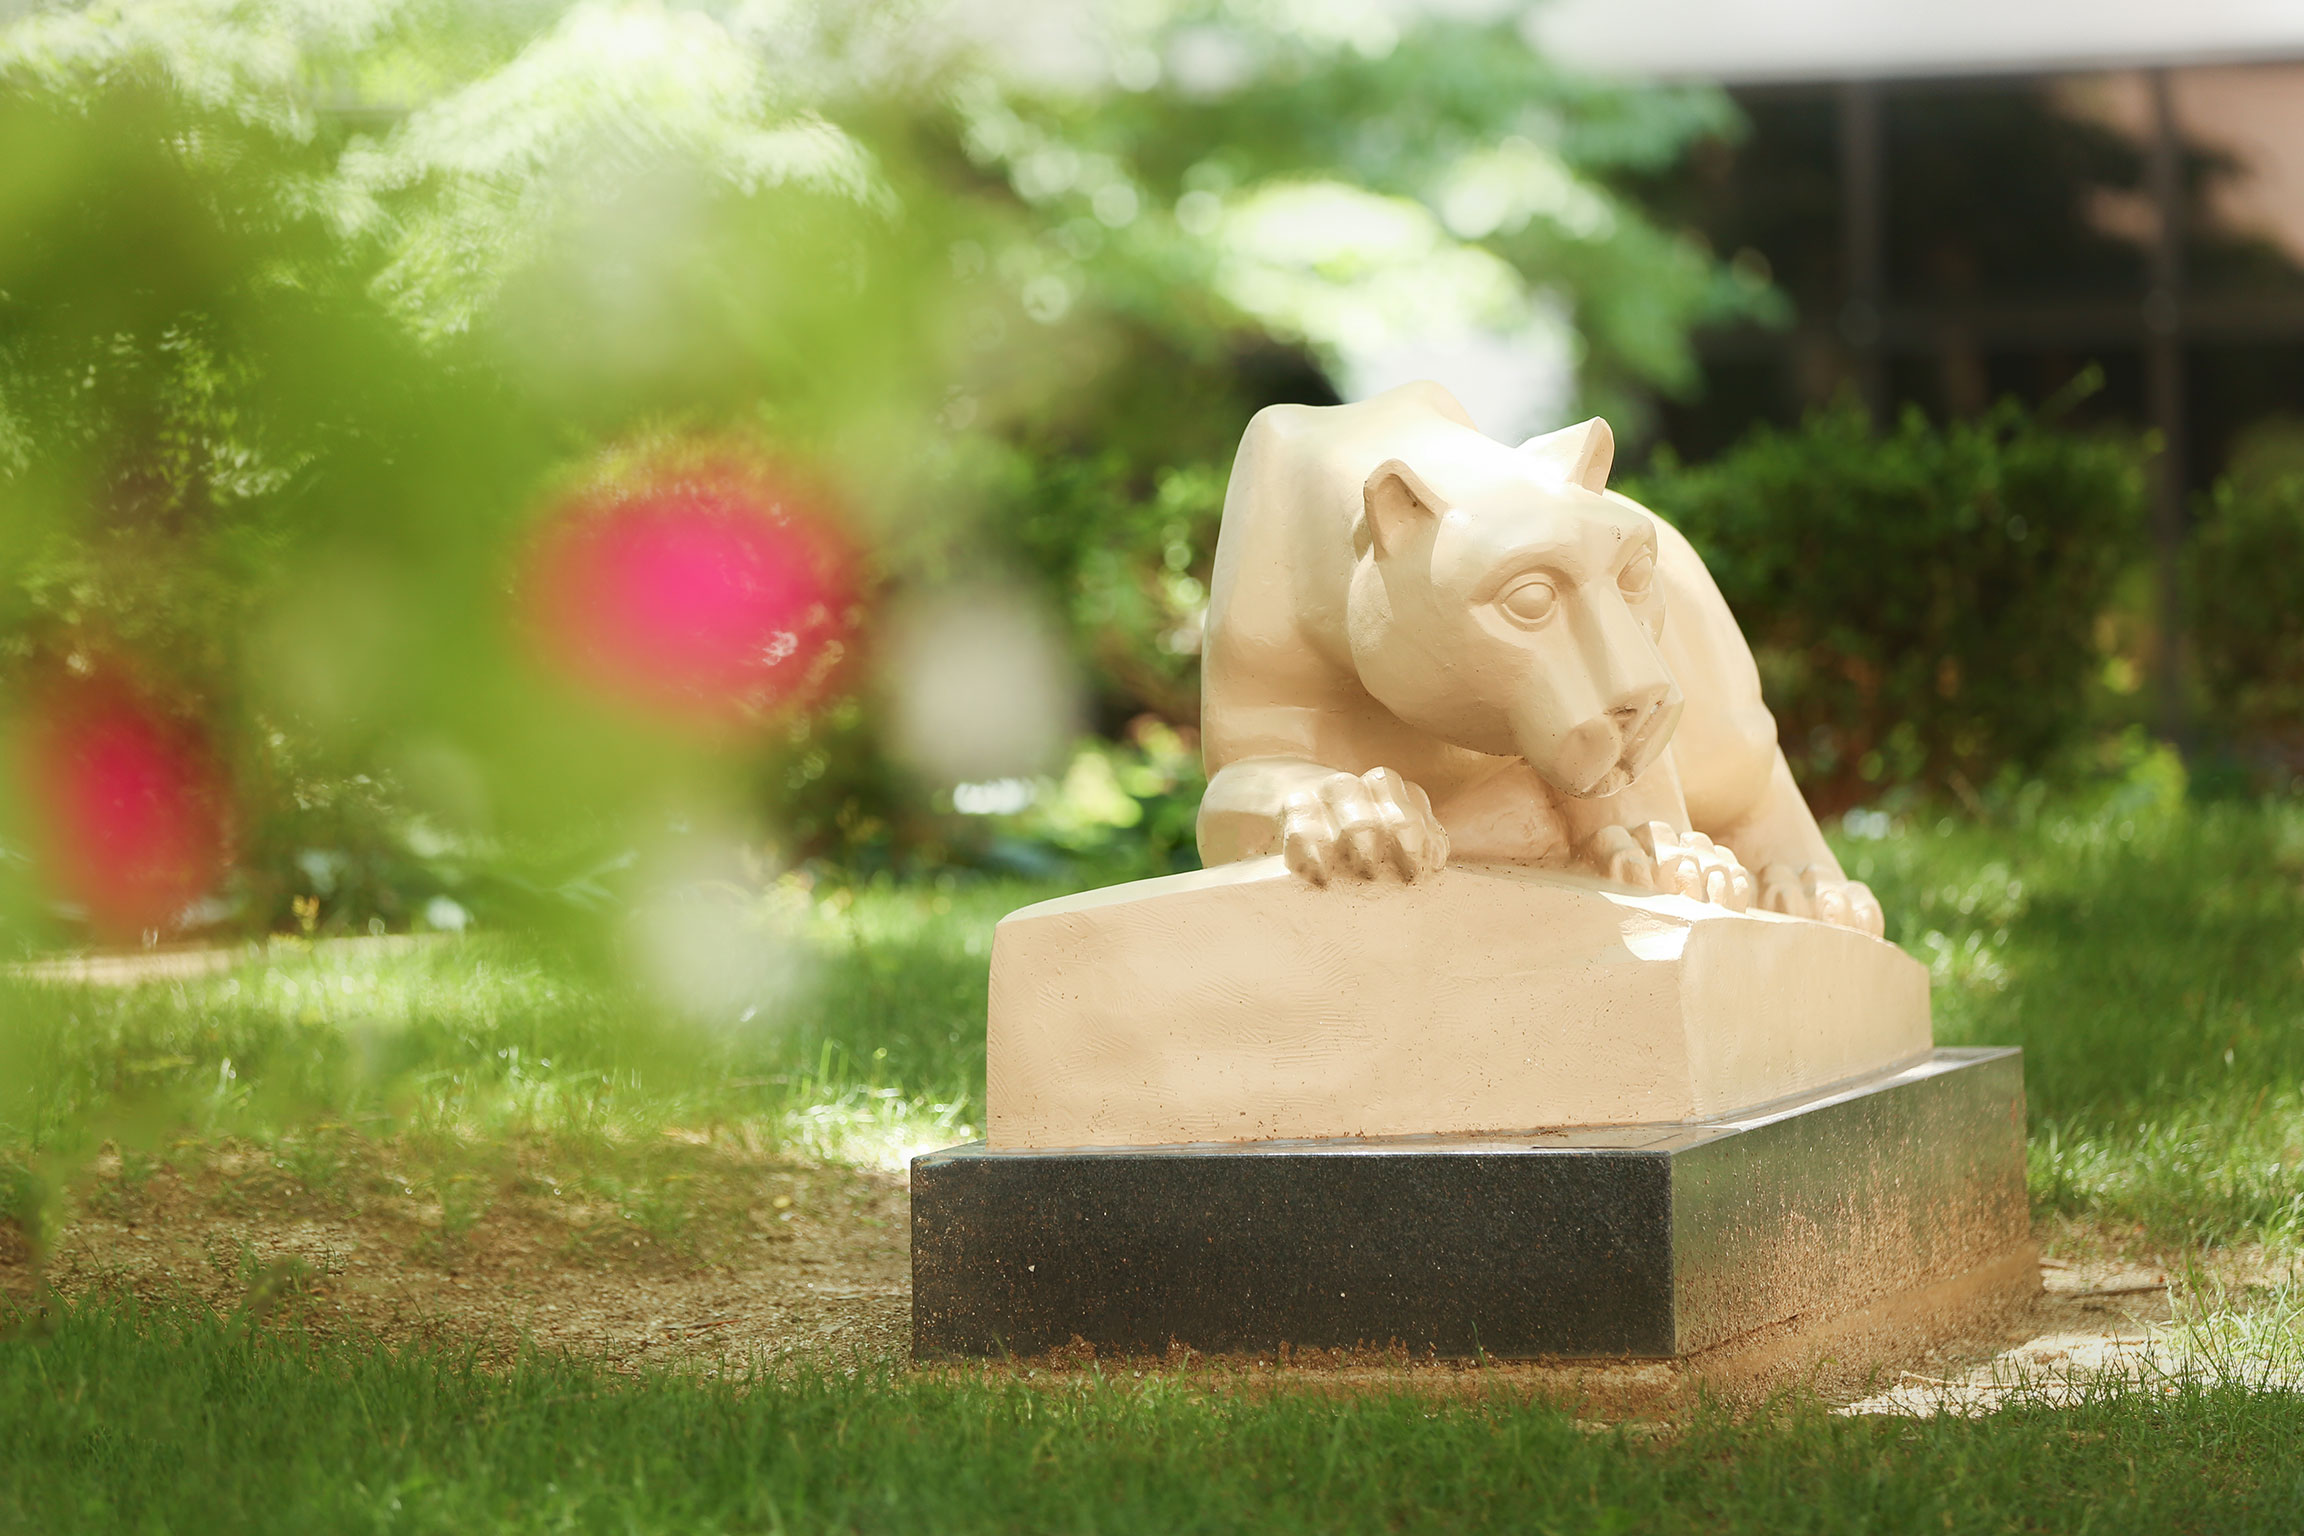 Penn State College of Medicine's Nittany lion statue is seen in a courtyard in the spring.